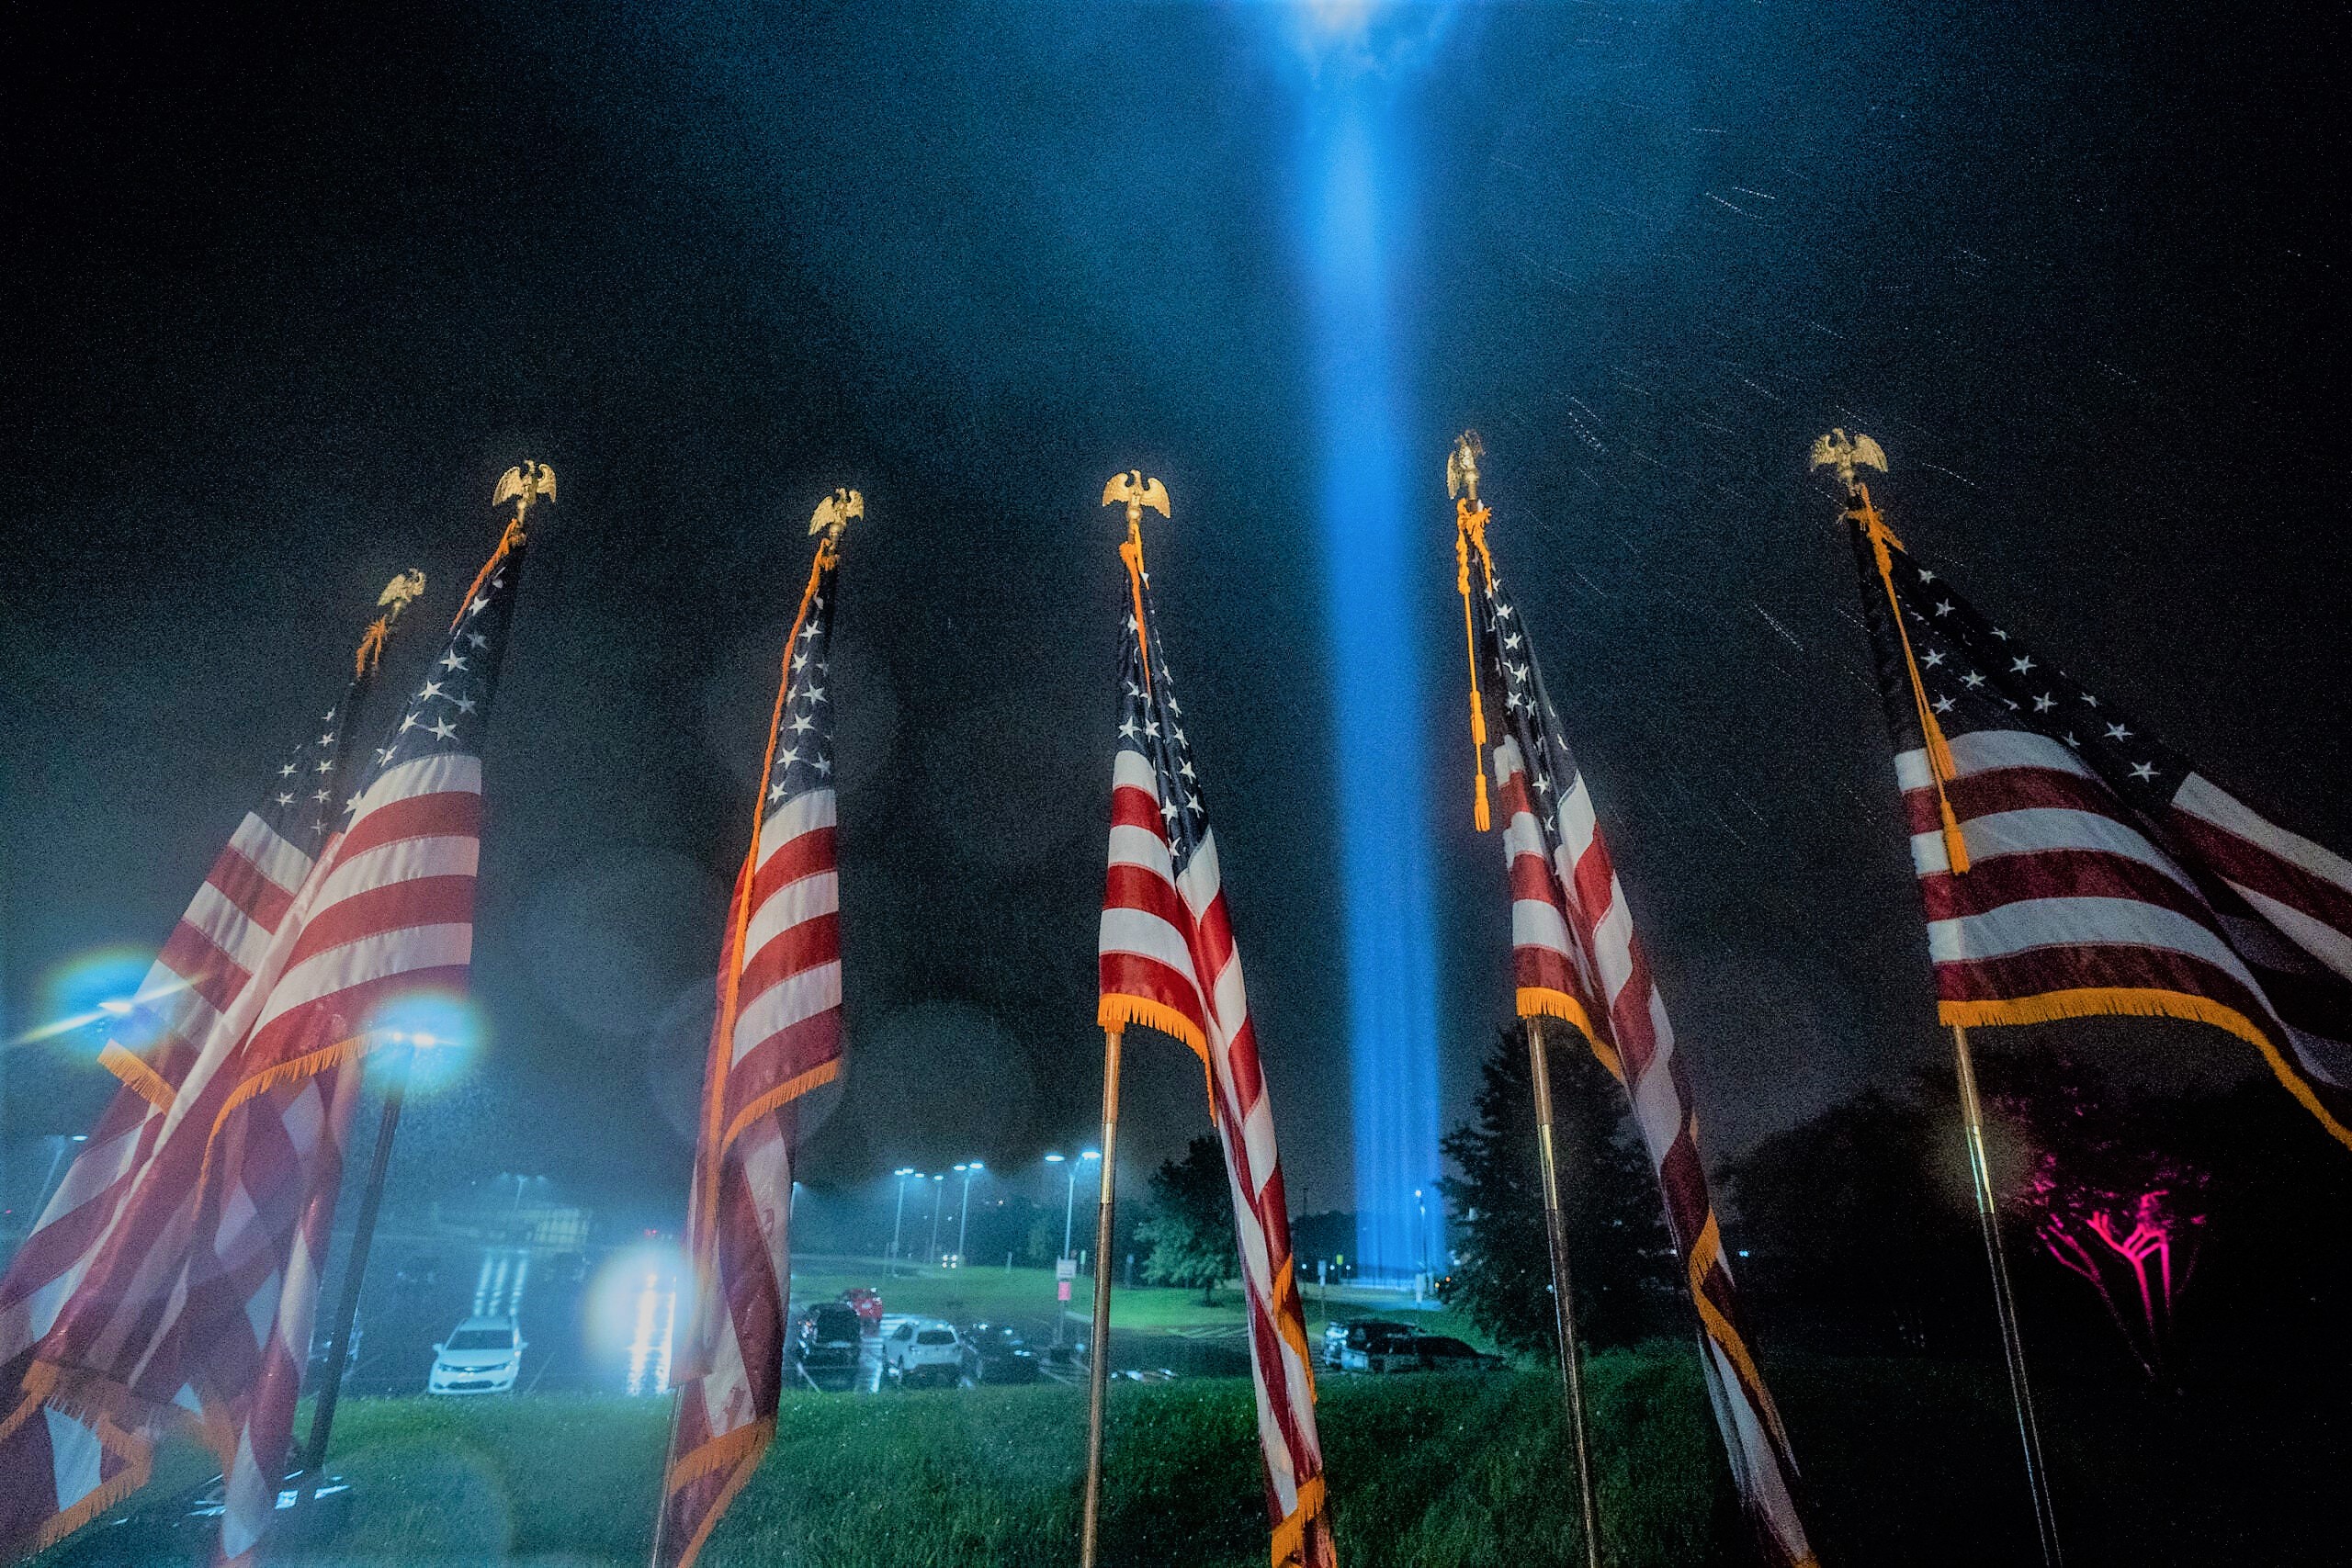 The Towers of Light at The Pentagon will be lit from September 9, 2021 through September 12, 2021. (Photo: Tunnel to Towers Foundation)